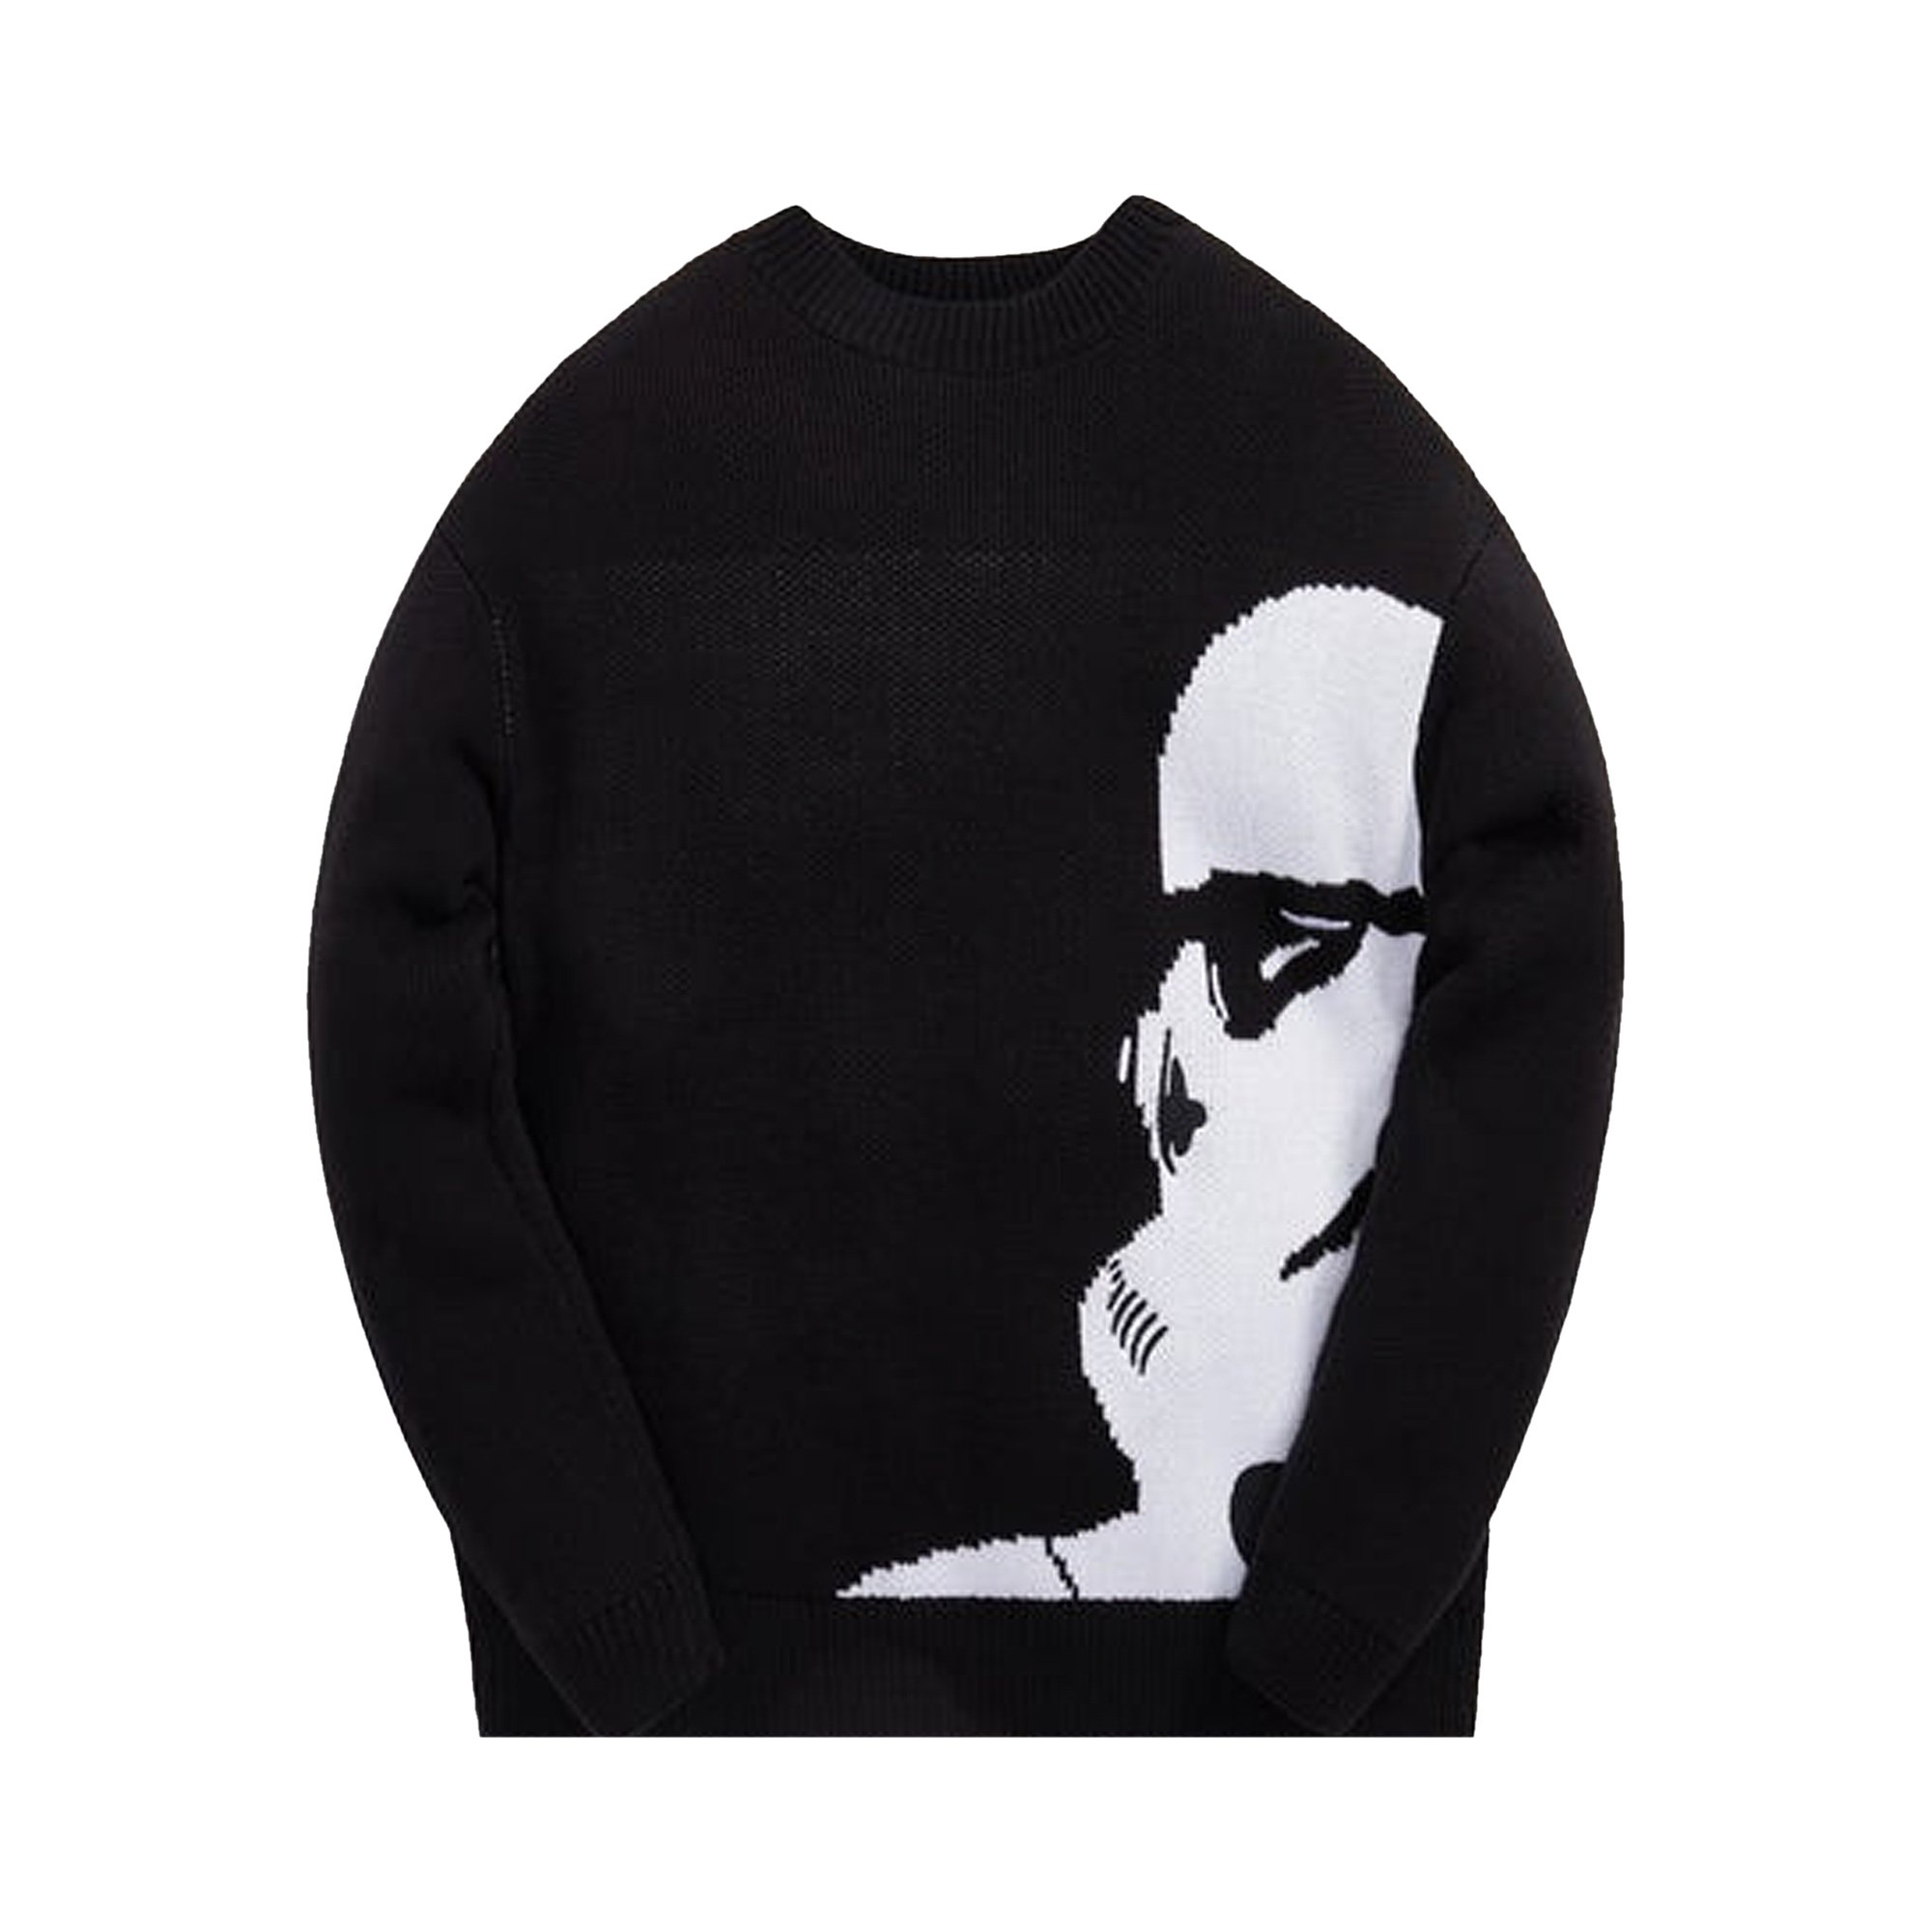 Buy Kith For Star Wars Stormtrooper Crewneck Sweater 'Black